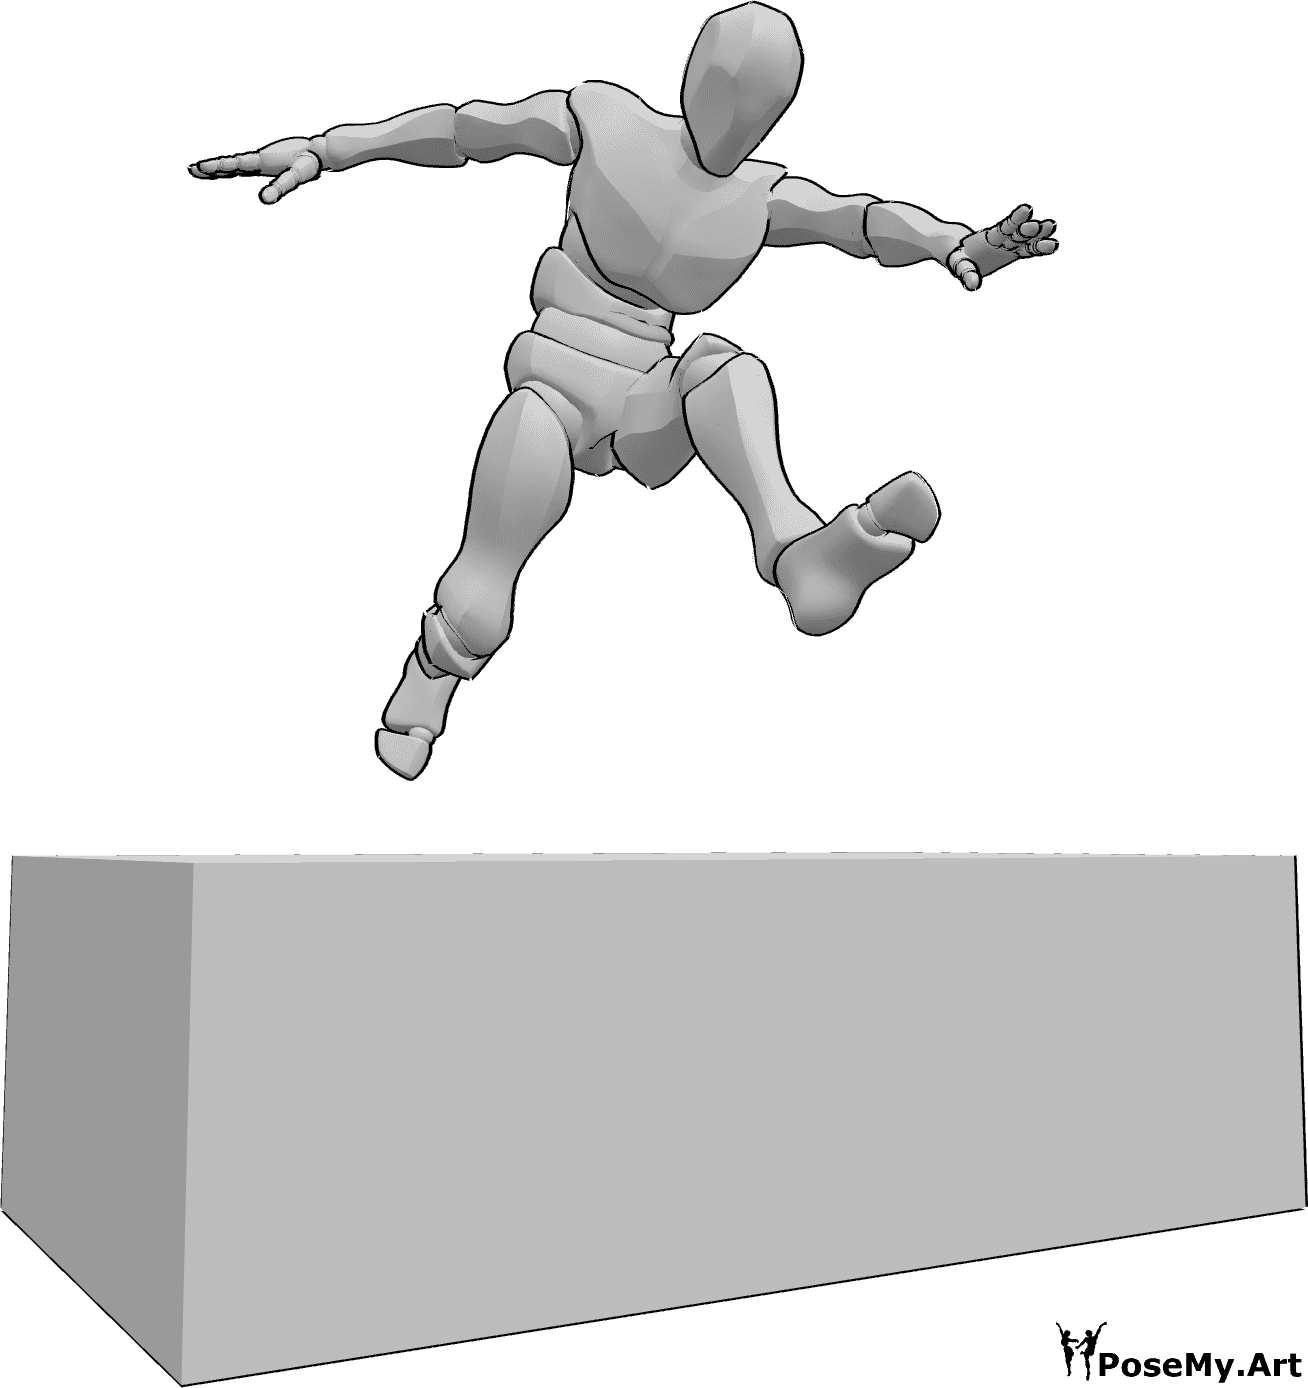 Pose Reference - Jumping over obstacle pose - Male is jumping high from running, jumping over an obstacle